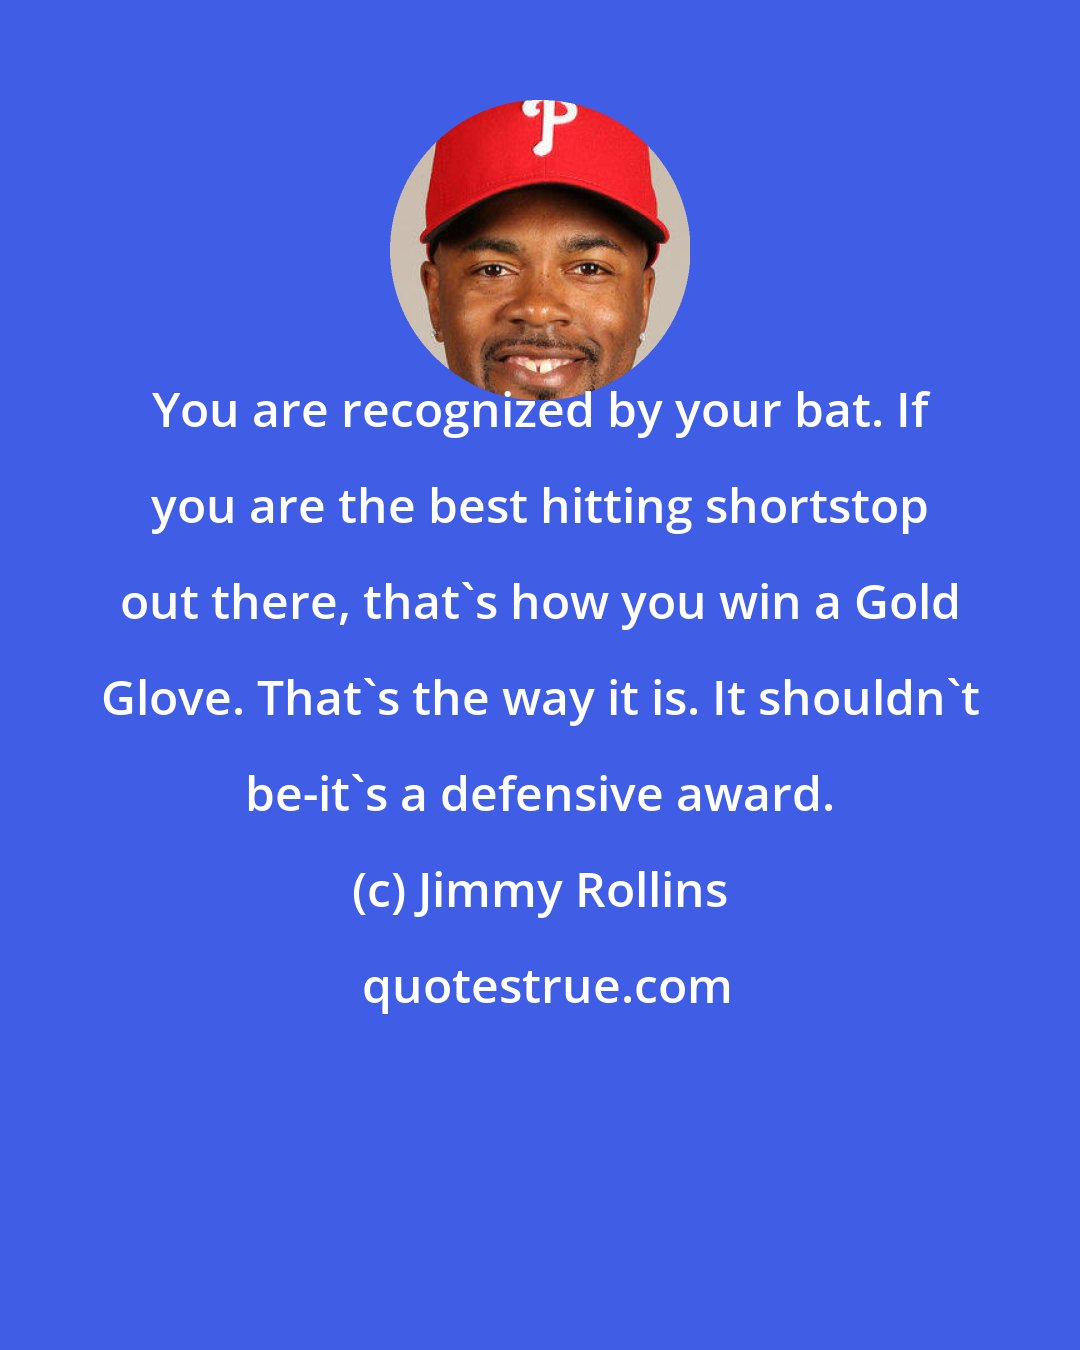 Jimmy Rollins: You are recognized by your bat. If you are the best hitting shortstop out there, that's how you win a Gold Glove. That's the way it is. It shouldn't be-it's a defensive award.